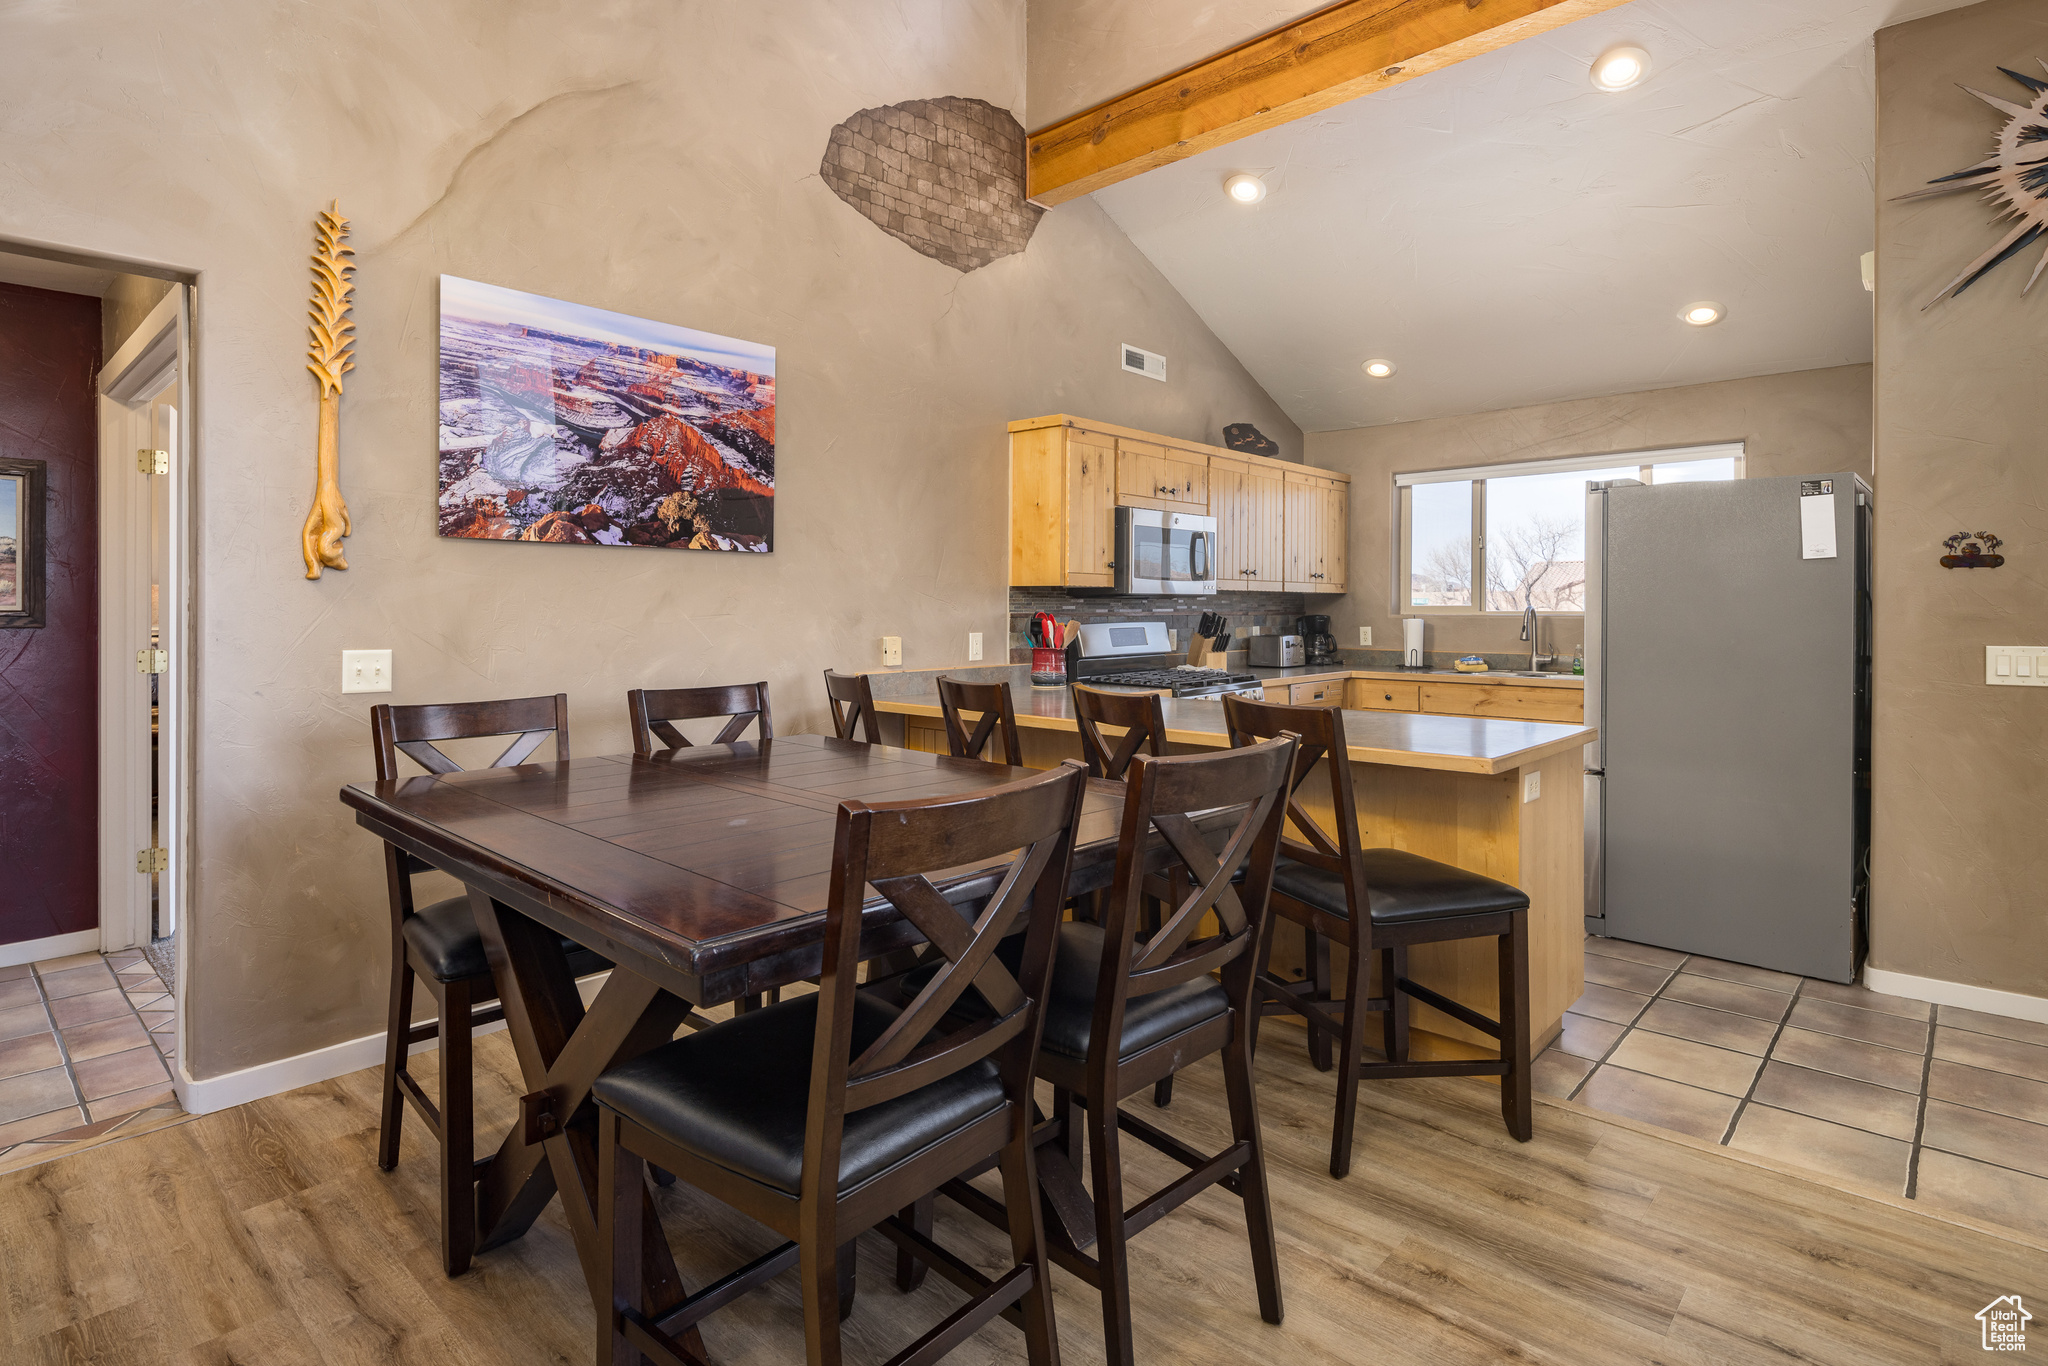 3686 S SPANISH VALLEY #E1, Moab, Utah 84532, 3 Bedrooms Bedrooms, 10 Rooms Rooms,2 BathroomsBathrooms,Residential,For sale,SPANISH VALLEY,1864390